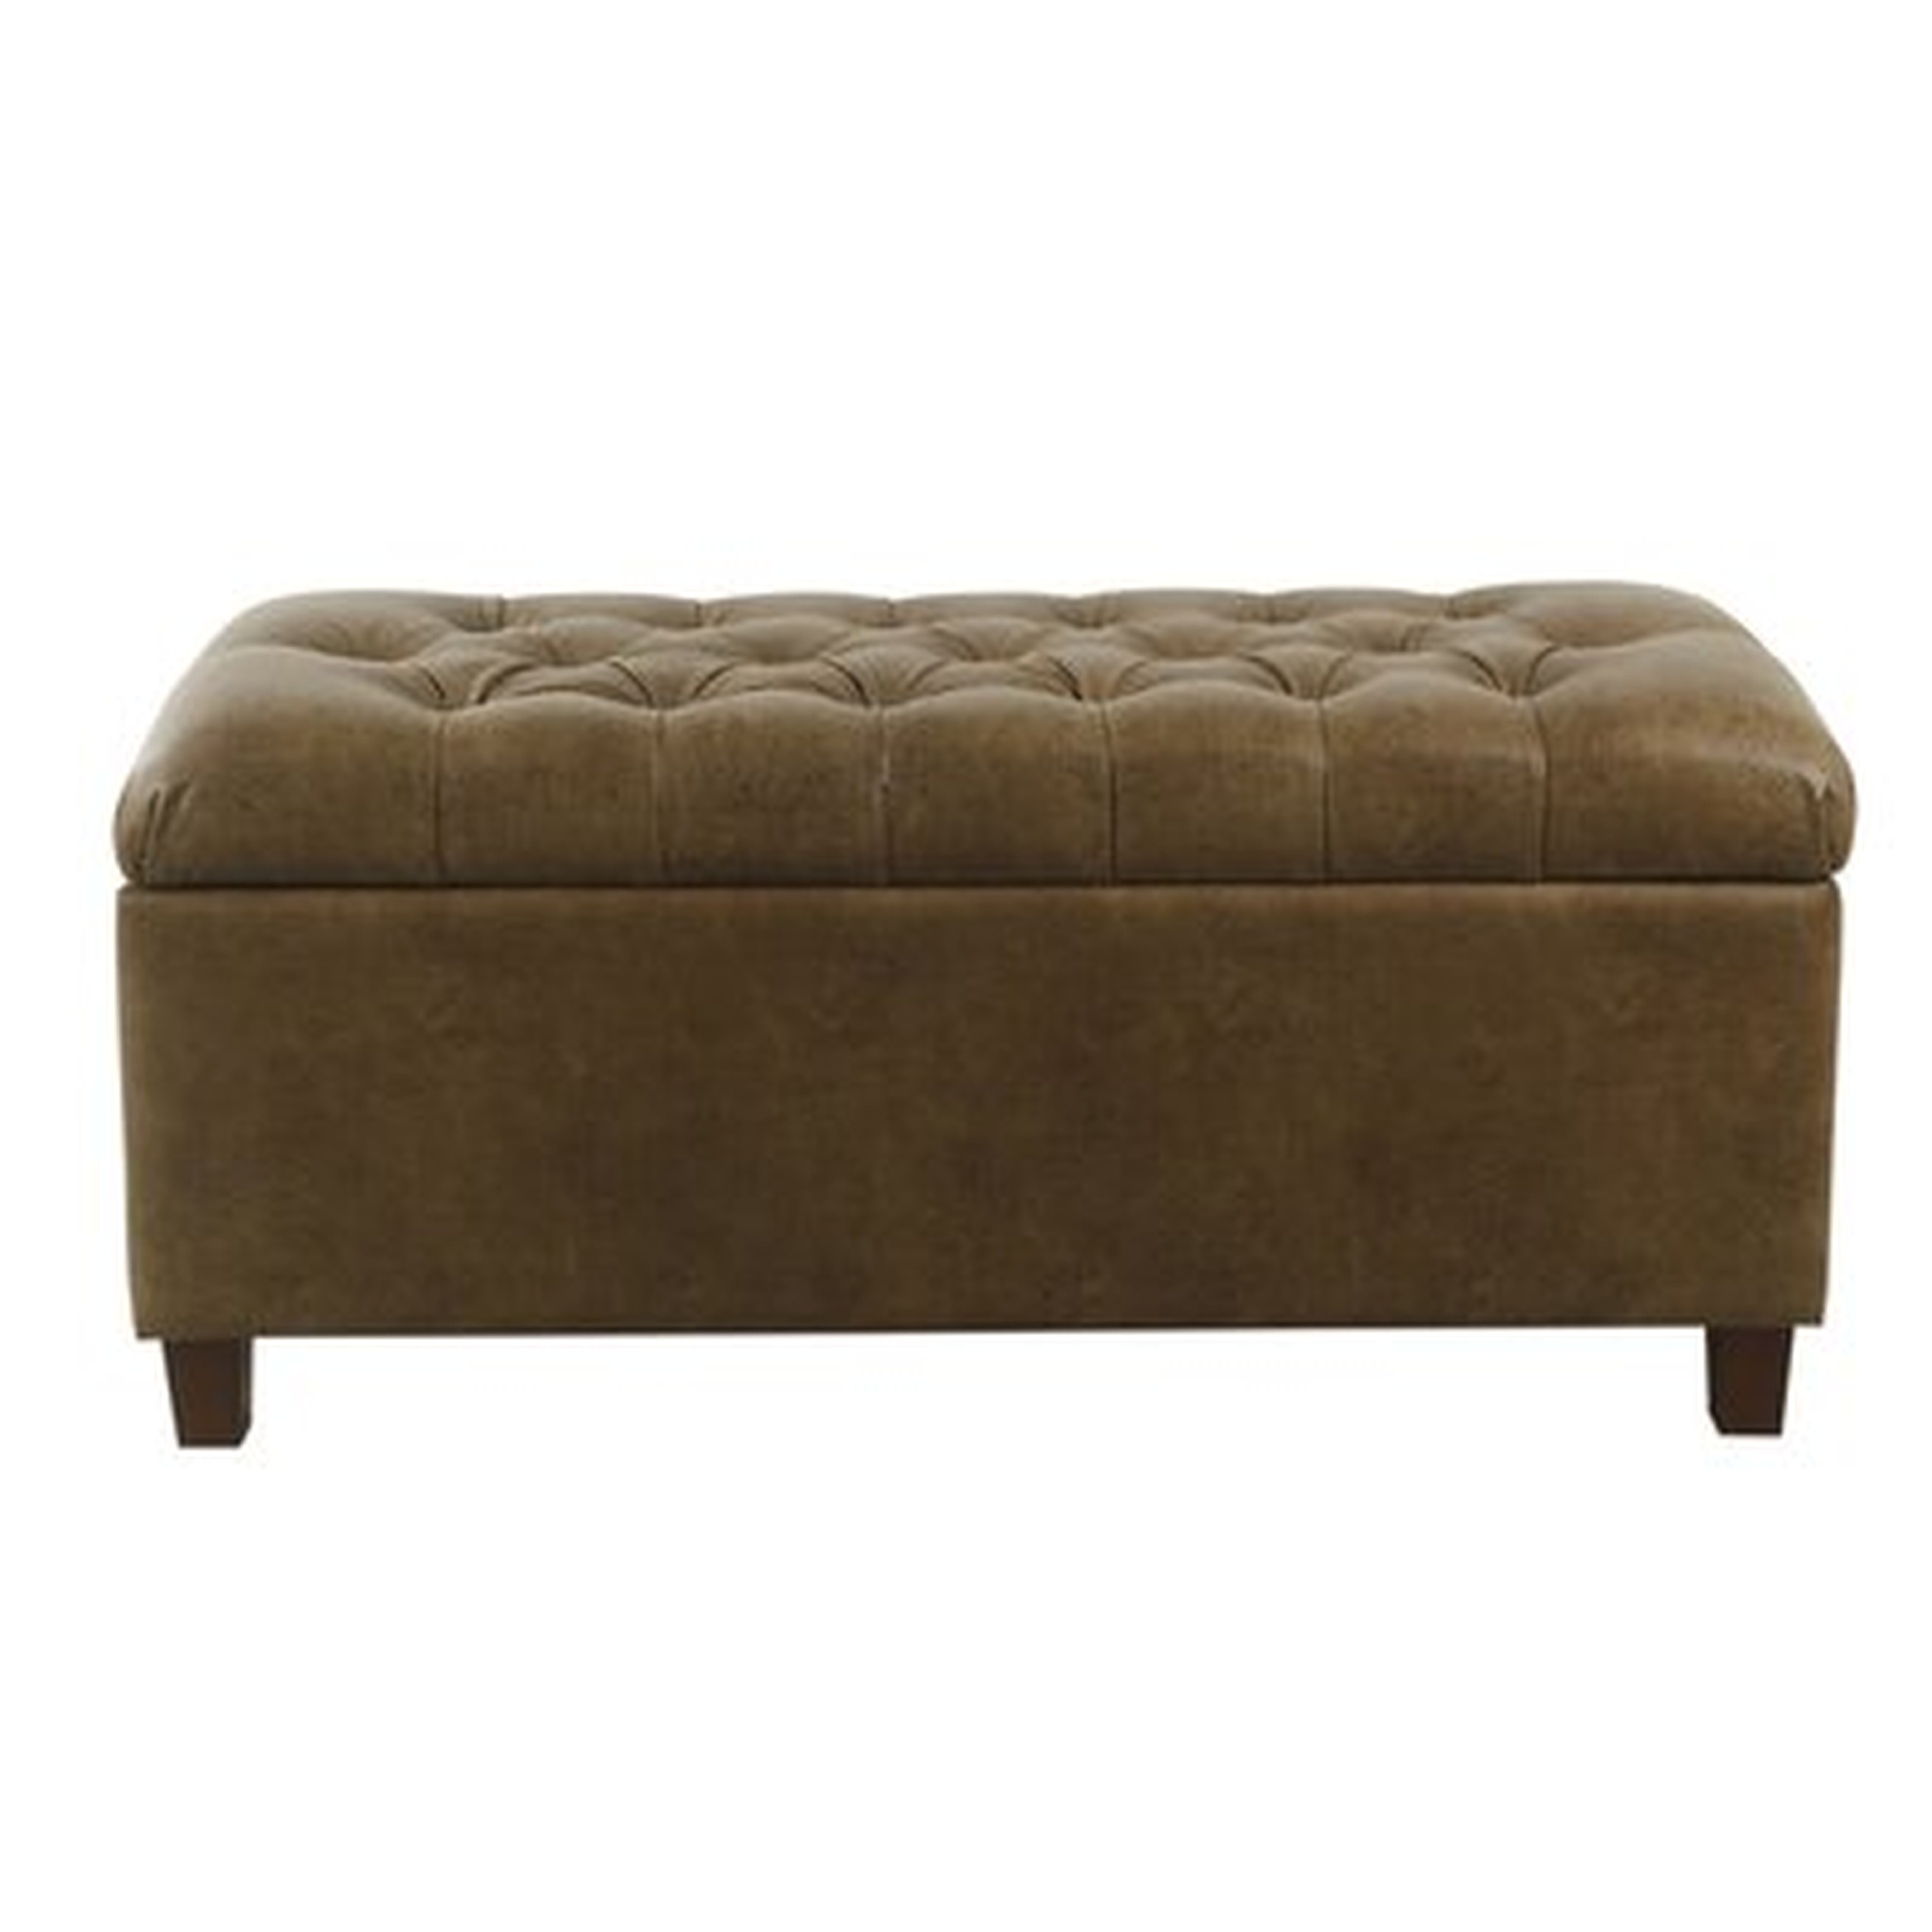 Ehlers Faux Leather Upholstered Storage Bench - Wayfair